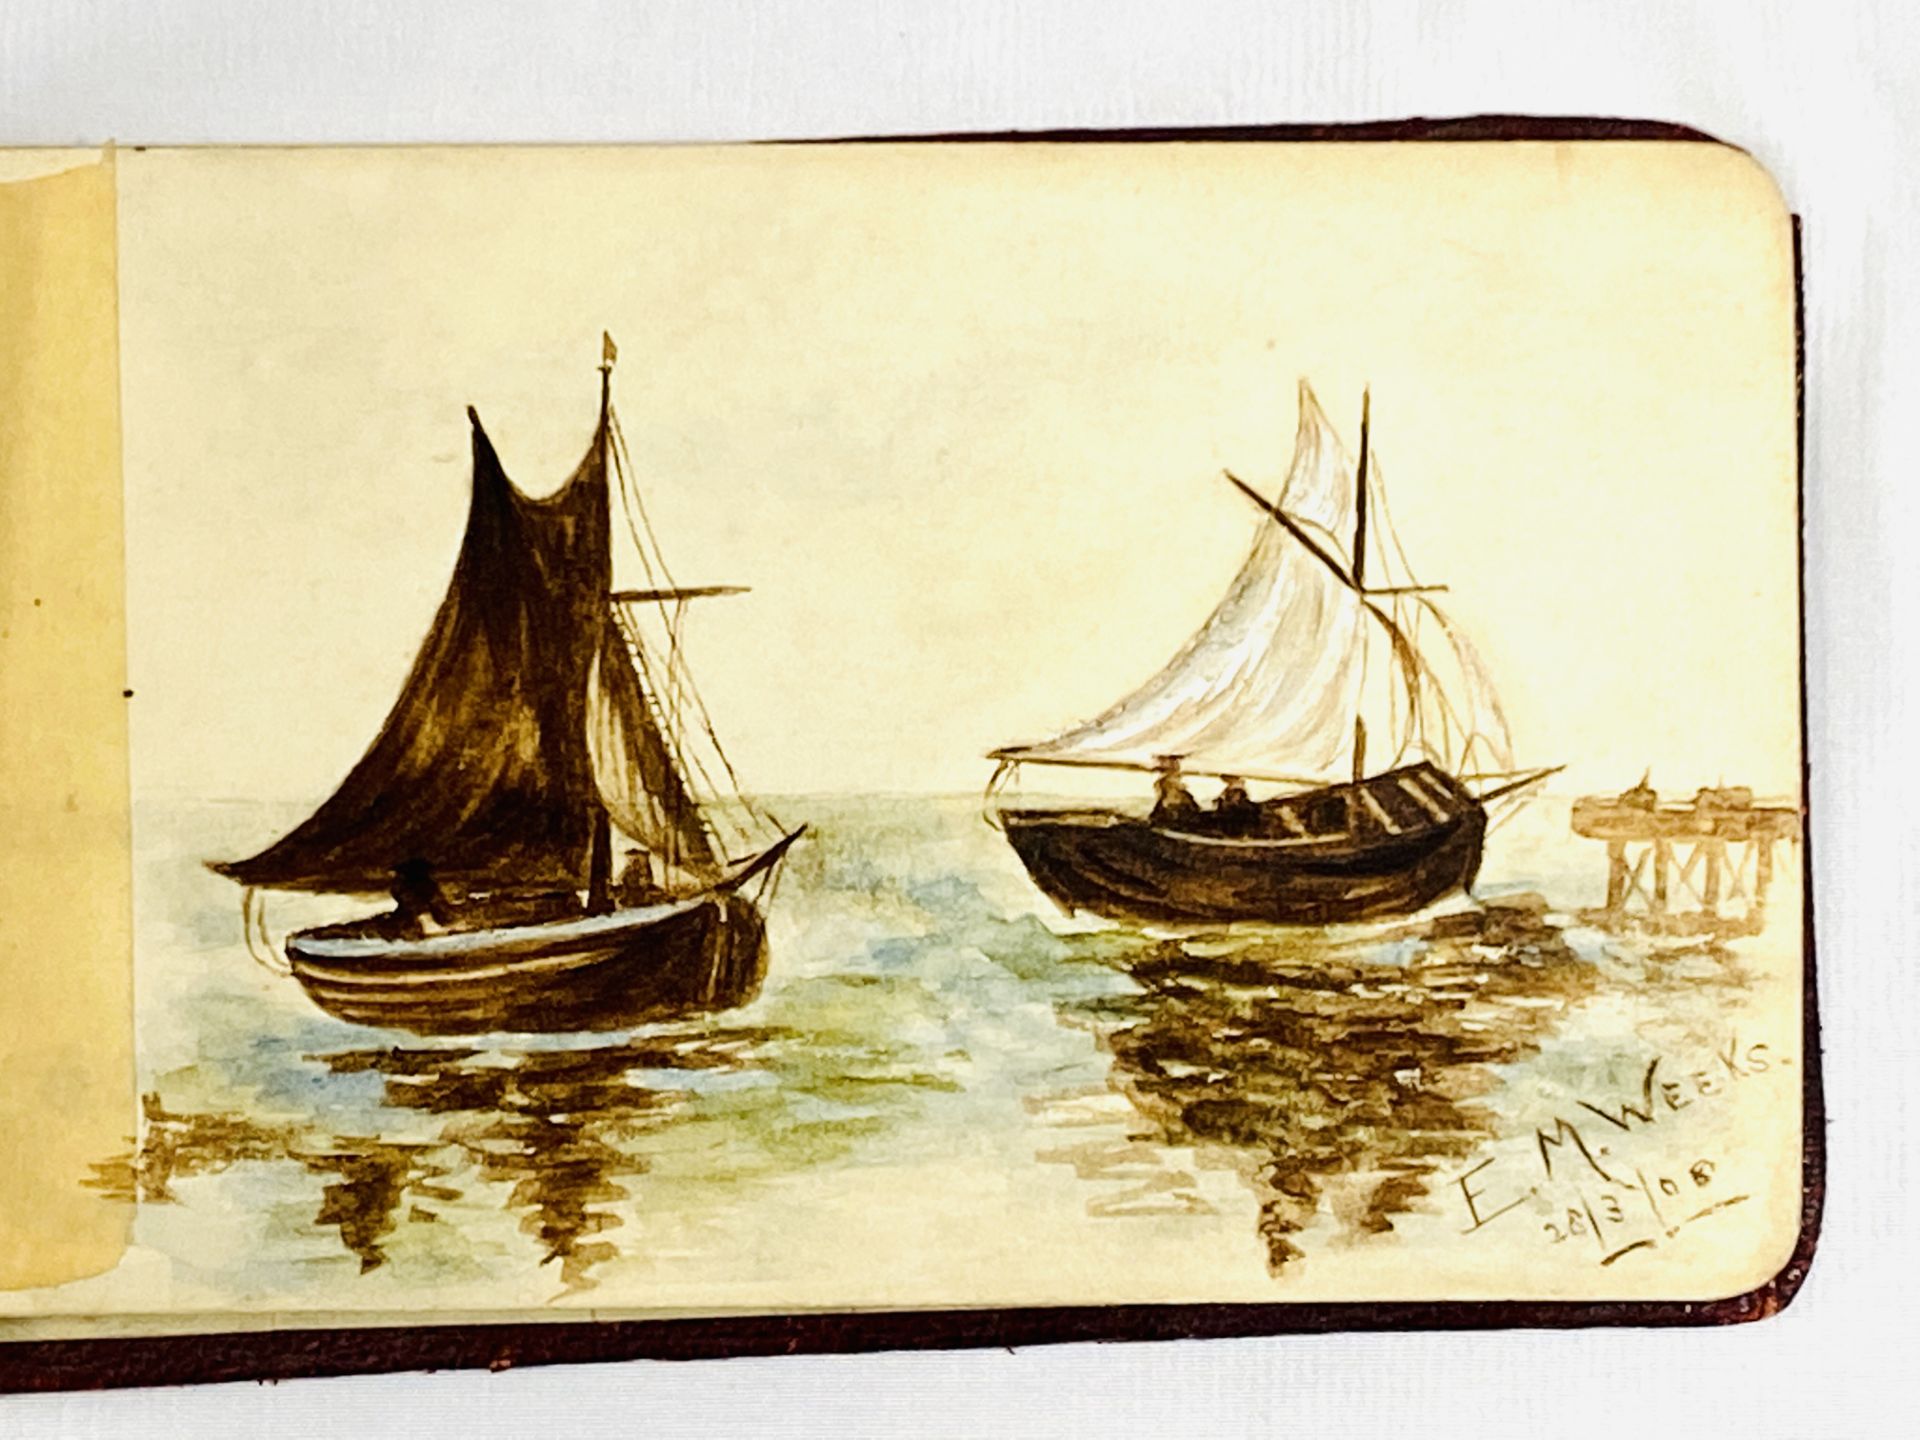 Early 20th century autograph book - Image 5 of 5